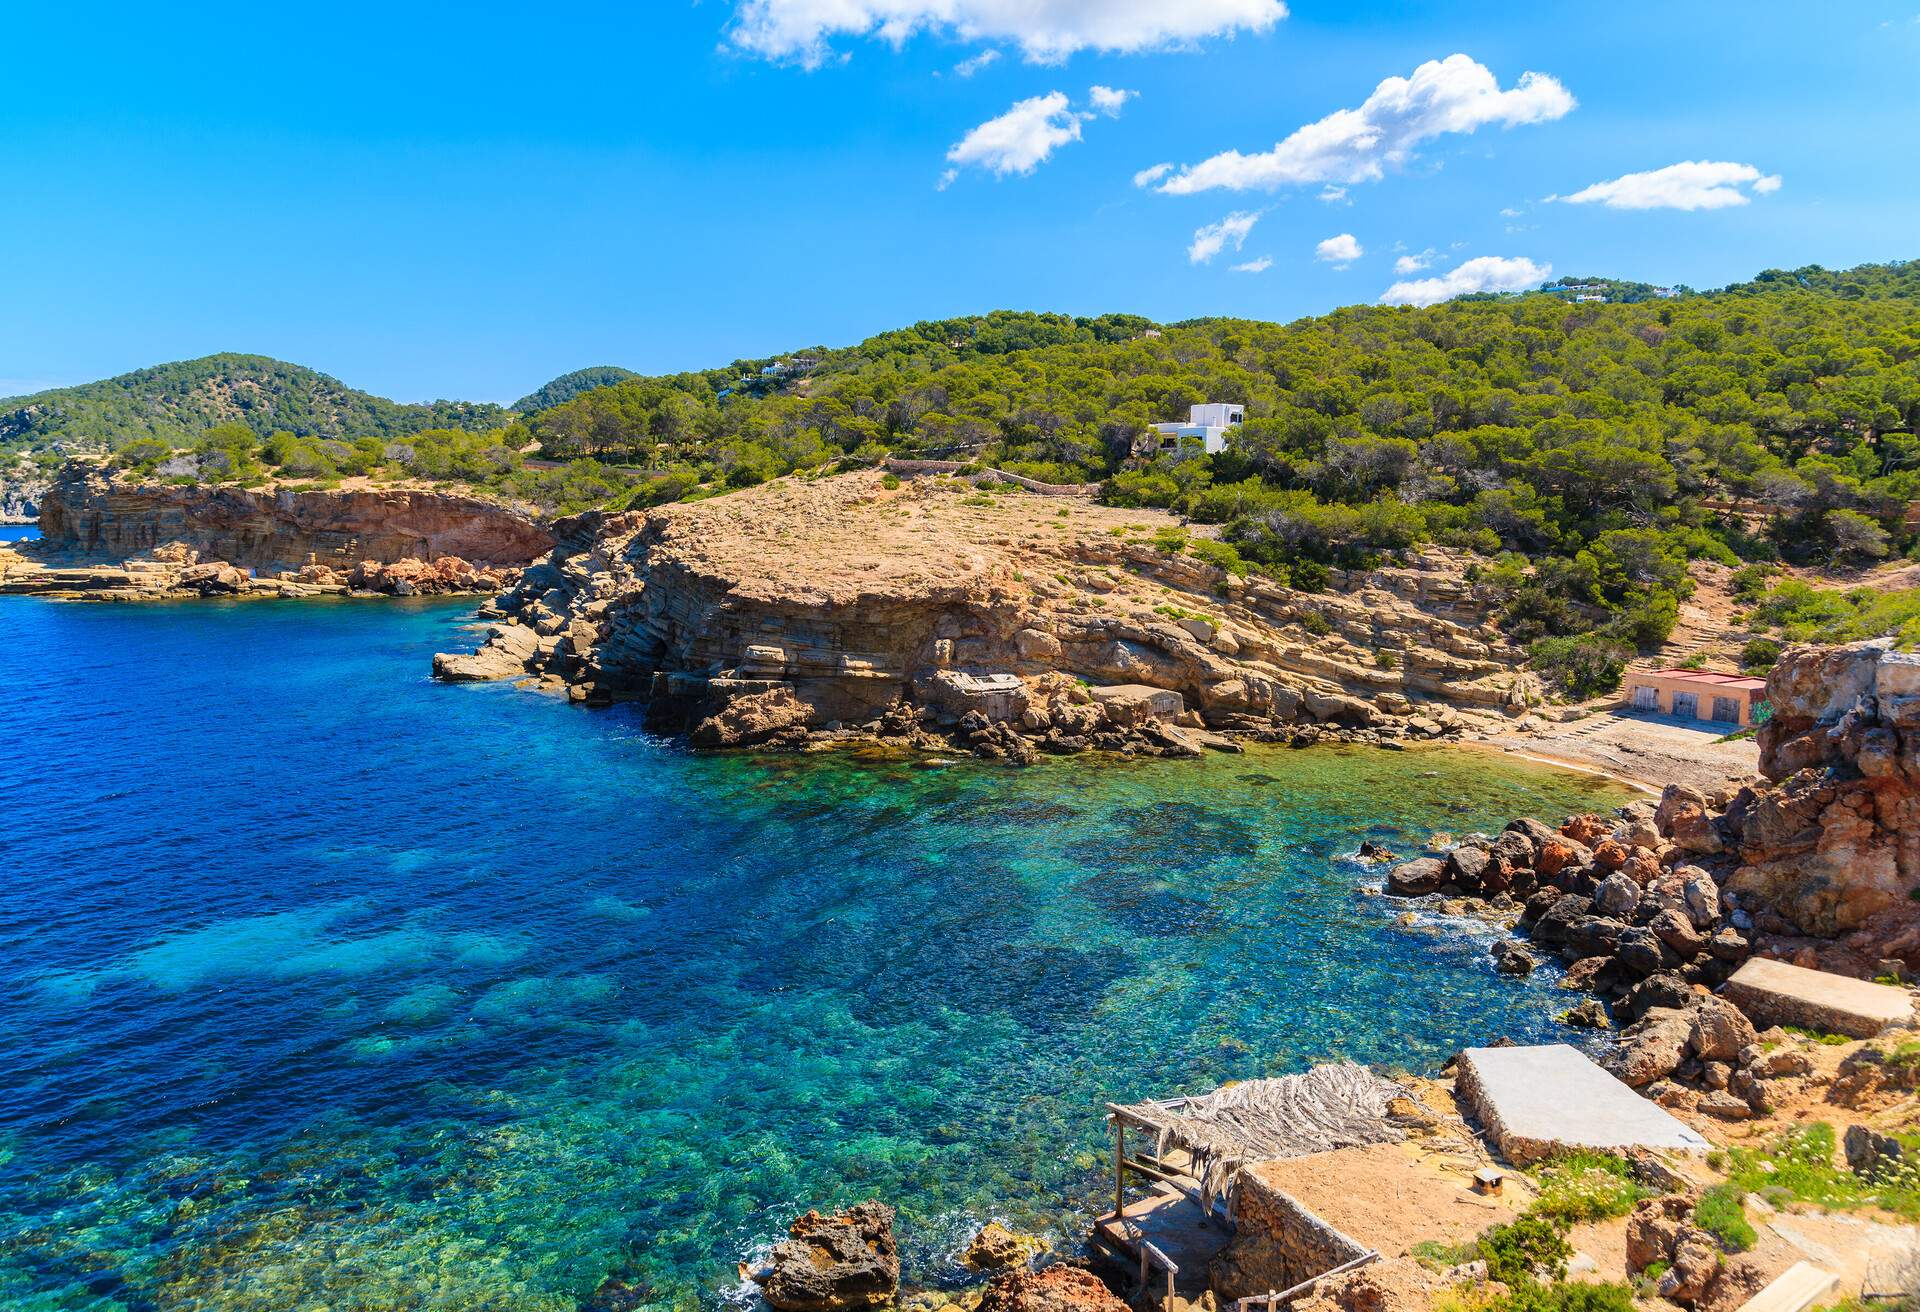 Ibiza is an island in the Mediterranean Sea off the east coast of Spain. It is the third largest of the Balearic Islands.